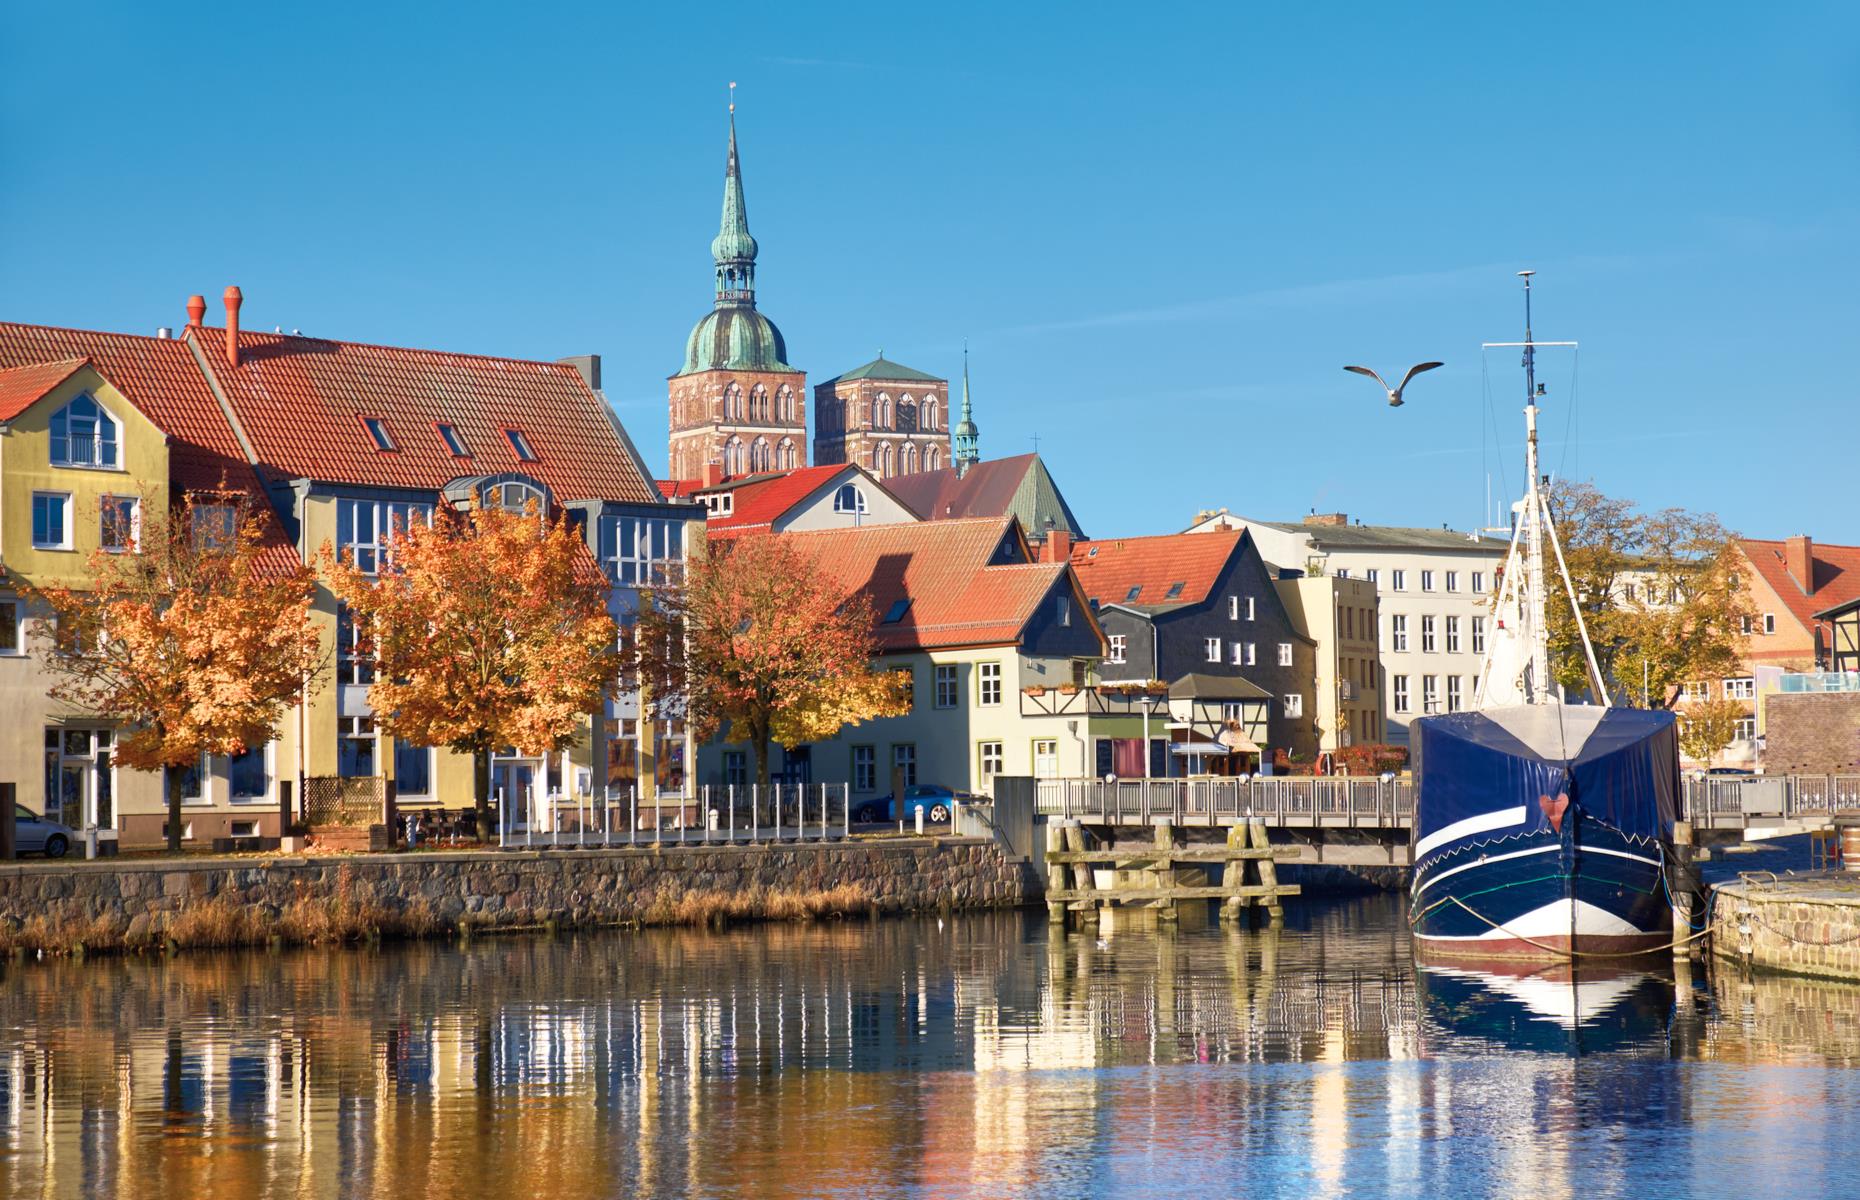 <p>Take a trip to the seaside and breathe in the fresh salty air. This roughly 250-mile (402km) seaside drive showcases the glorious beauty of the Baltic coast, or “German Riviera”, tracing the shoreline from Lübeck – known for its medieval and Gothic architecture – and along the northern edge of the country. Opt for coastal roads that skim past the water, passing beaches, sand dunes and waterfront towns like Wismar and Stralsund (pictured).</p>